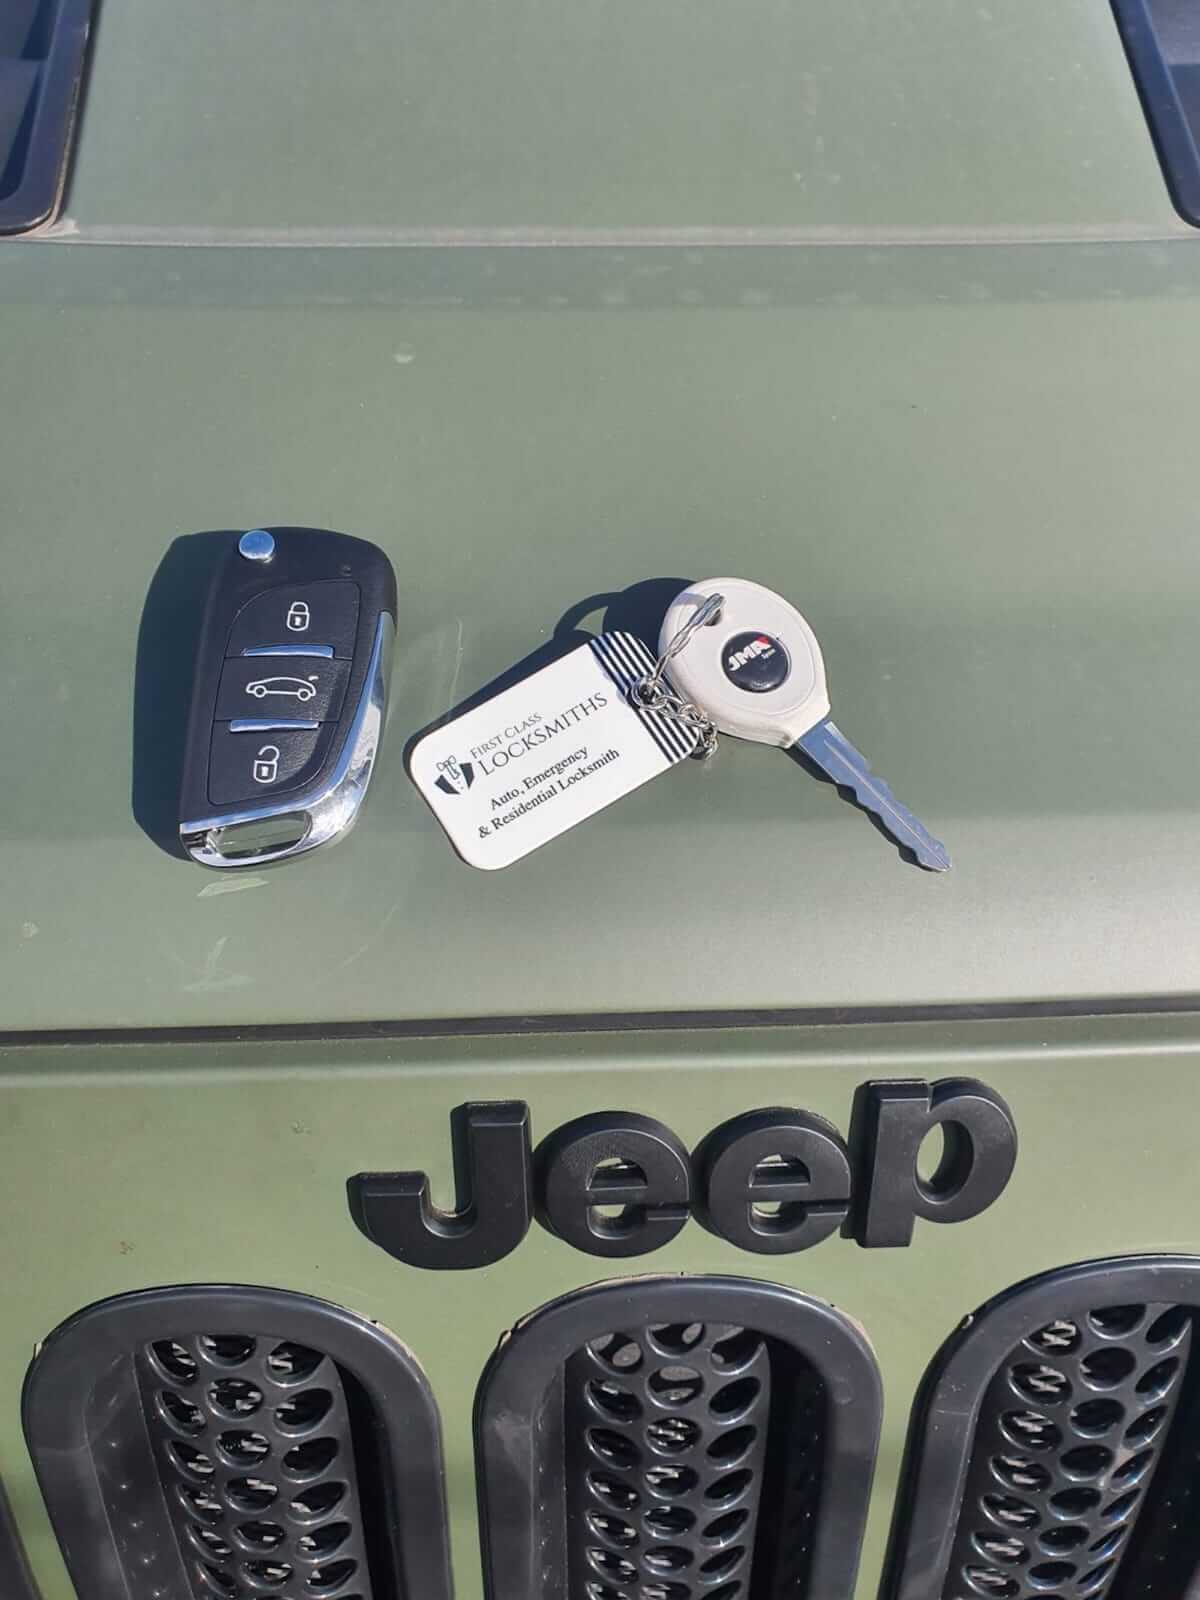 new key fob replacement for a Jeep